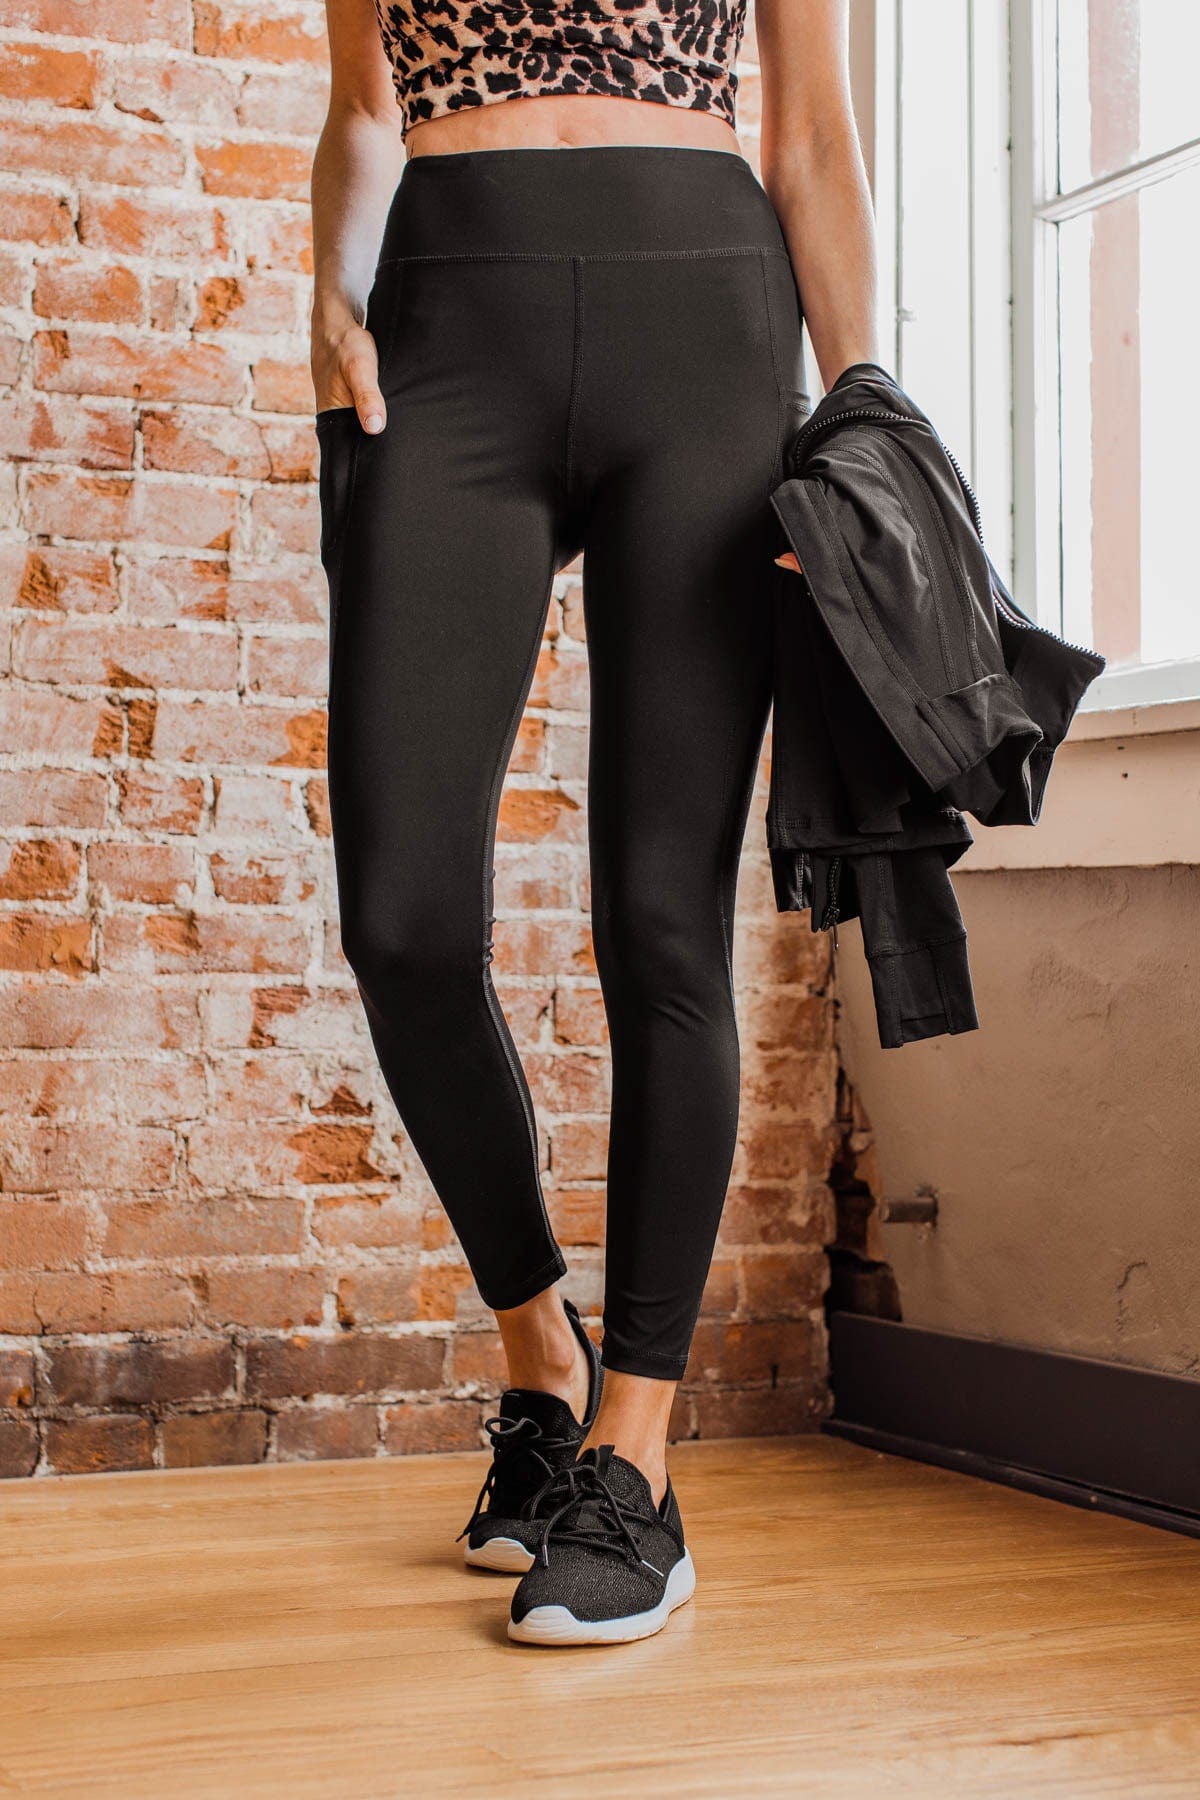 Create My Own Path Athleisure Leggings- Black – The Pulse Boutique